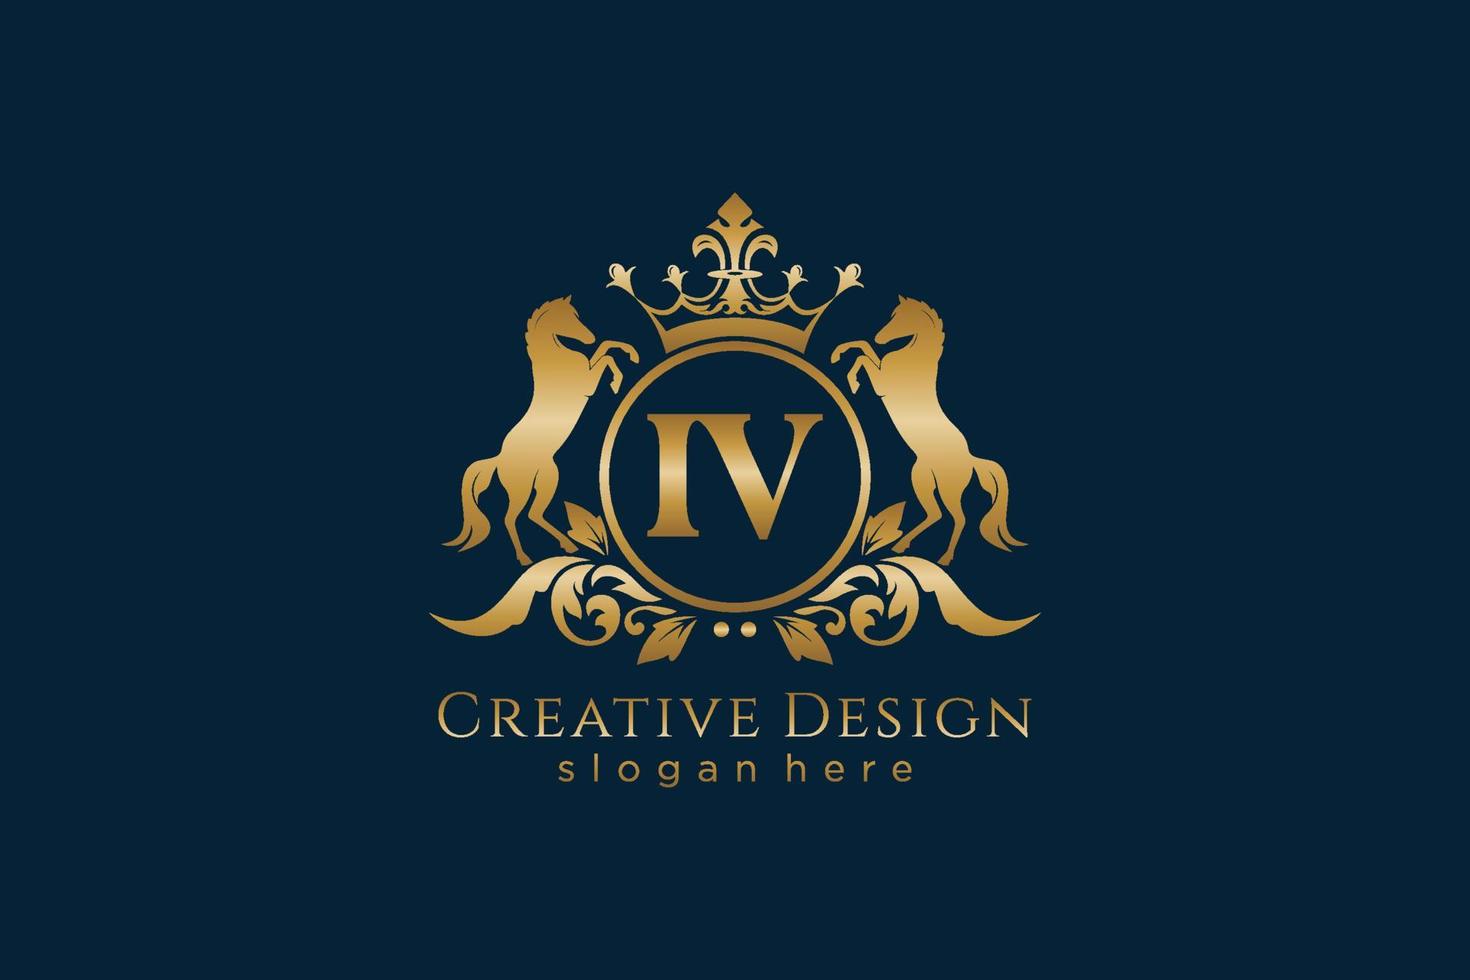 initial IV Retro golden crest with circle and two horses, badge template with scrolls and royal crown - perfect for luxurious branding projects vector